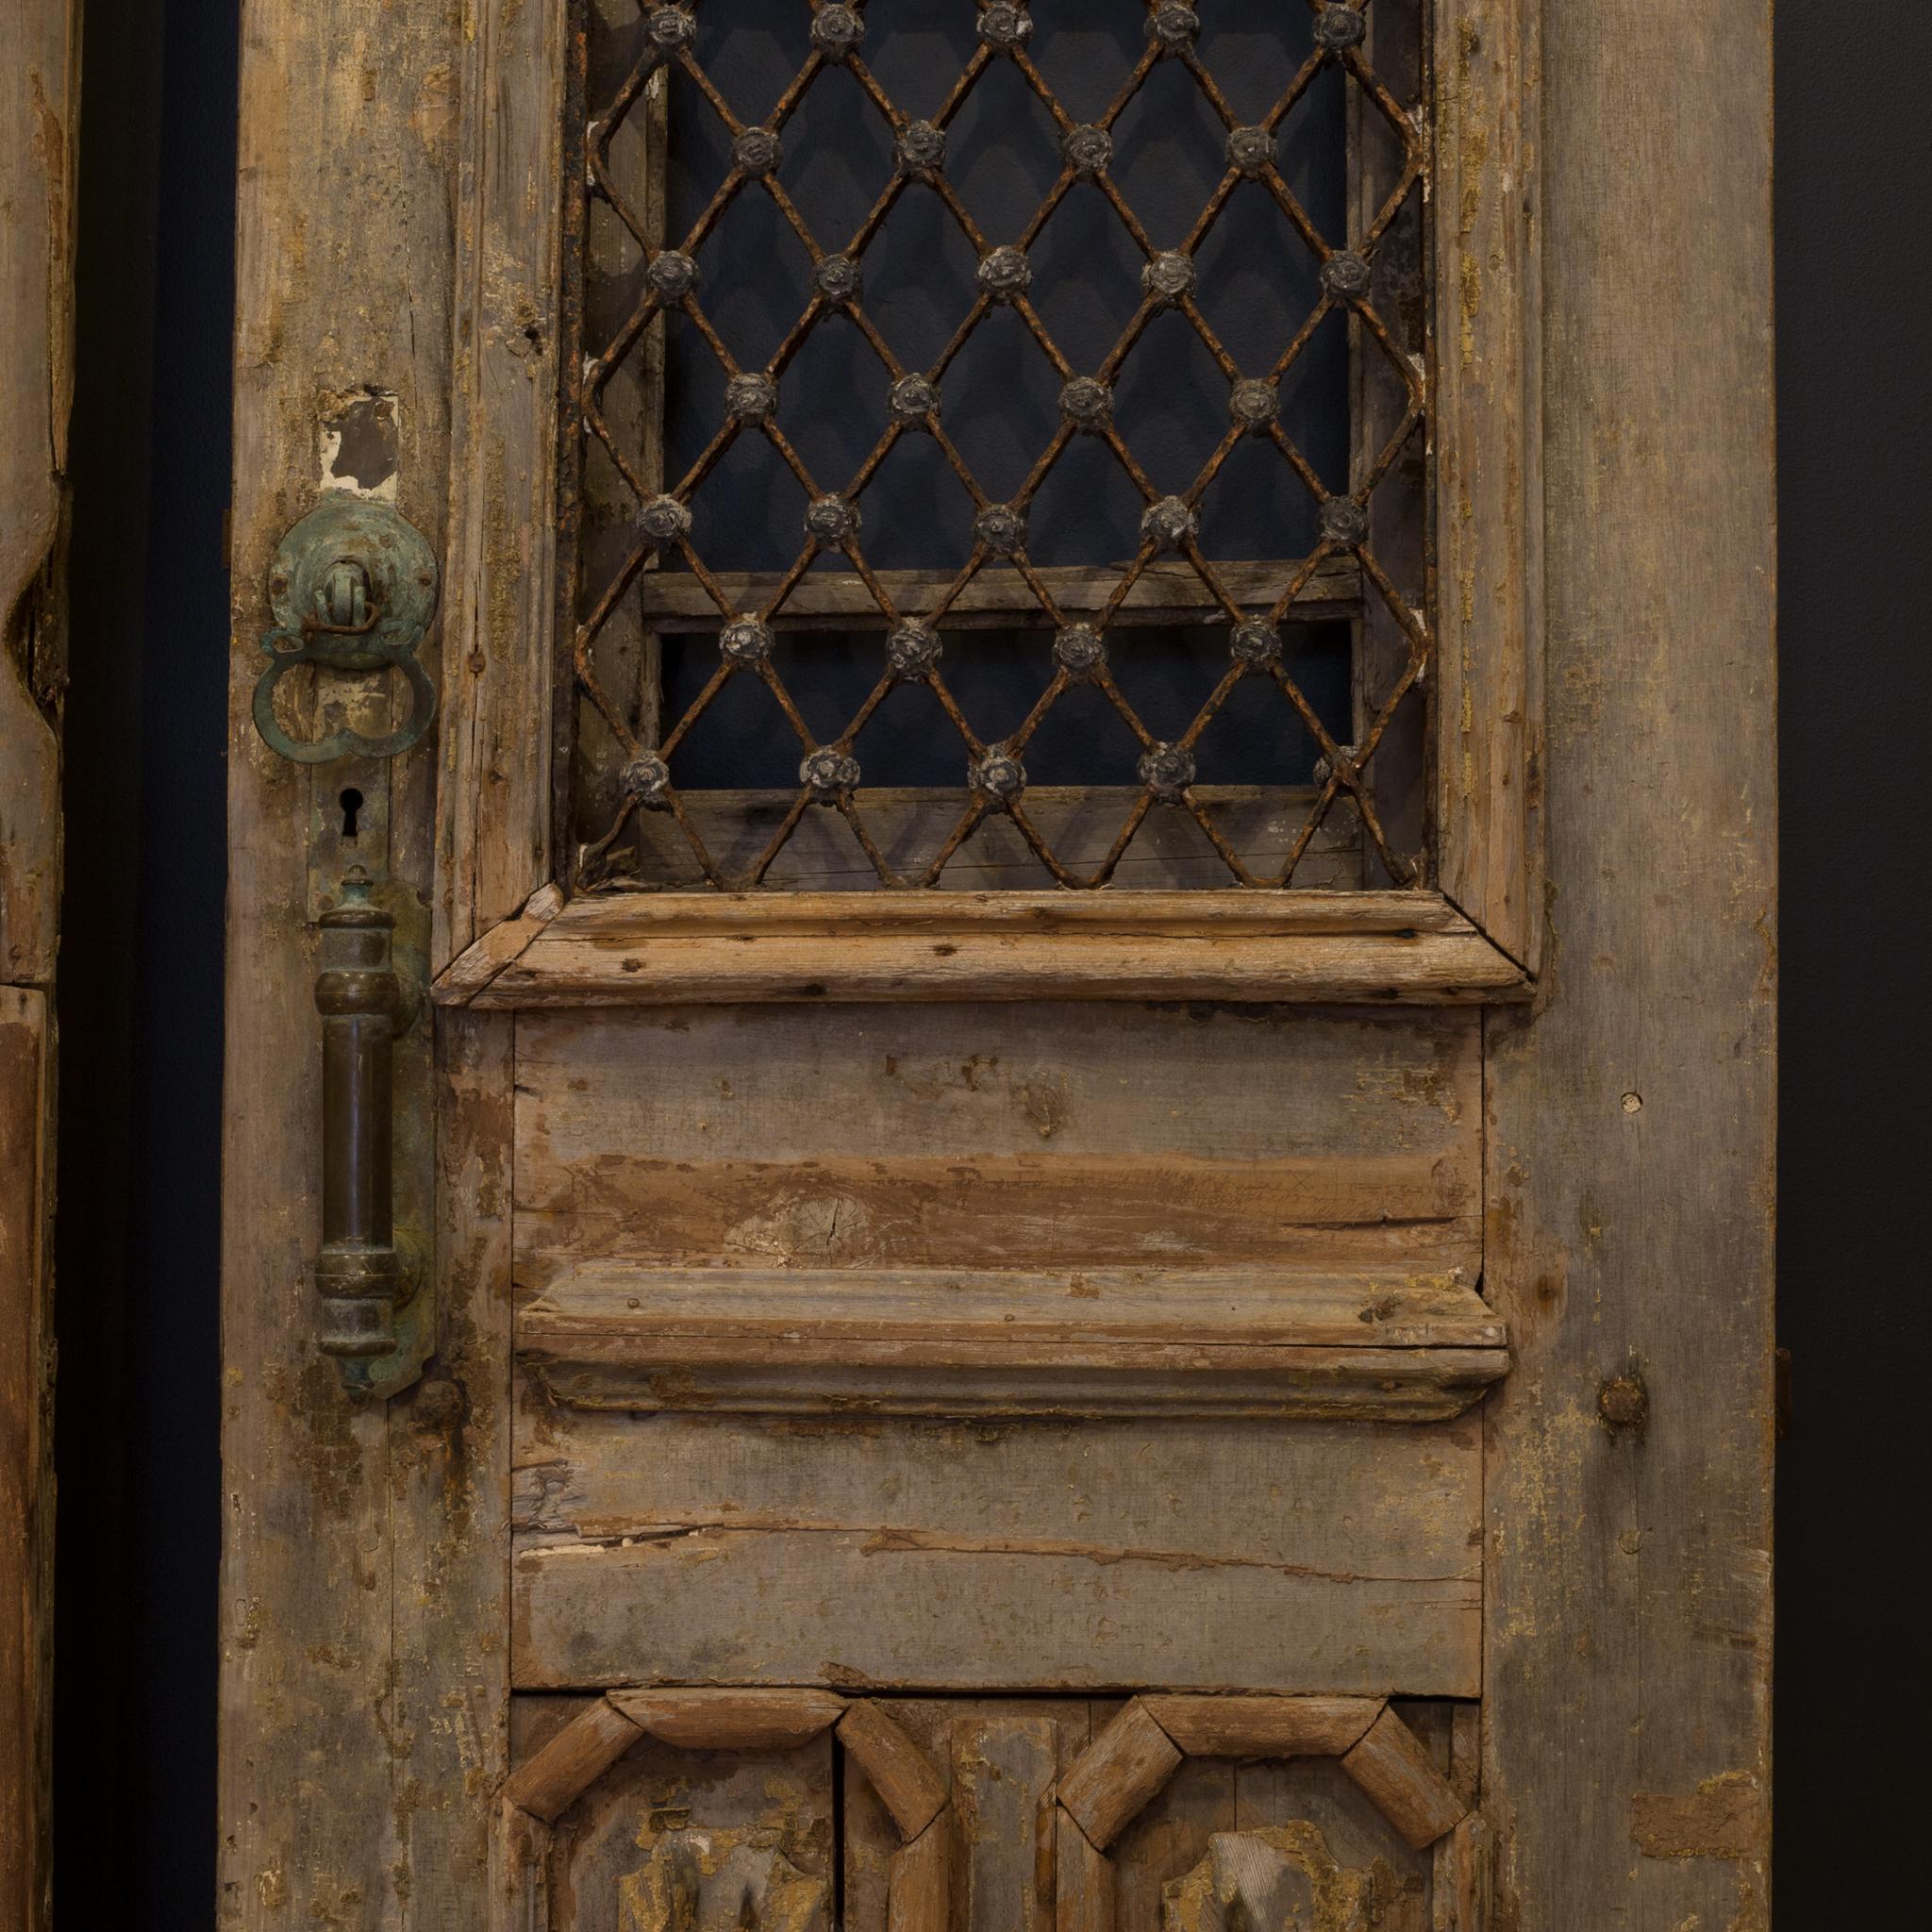 About

This a pair of original wooden castle doors with steel grate and substantial bronze hardware. The doors feature intricately carved heads of the man and woman of the house positioned at the top of each door. Shutters are on the backside that